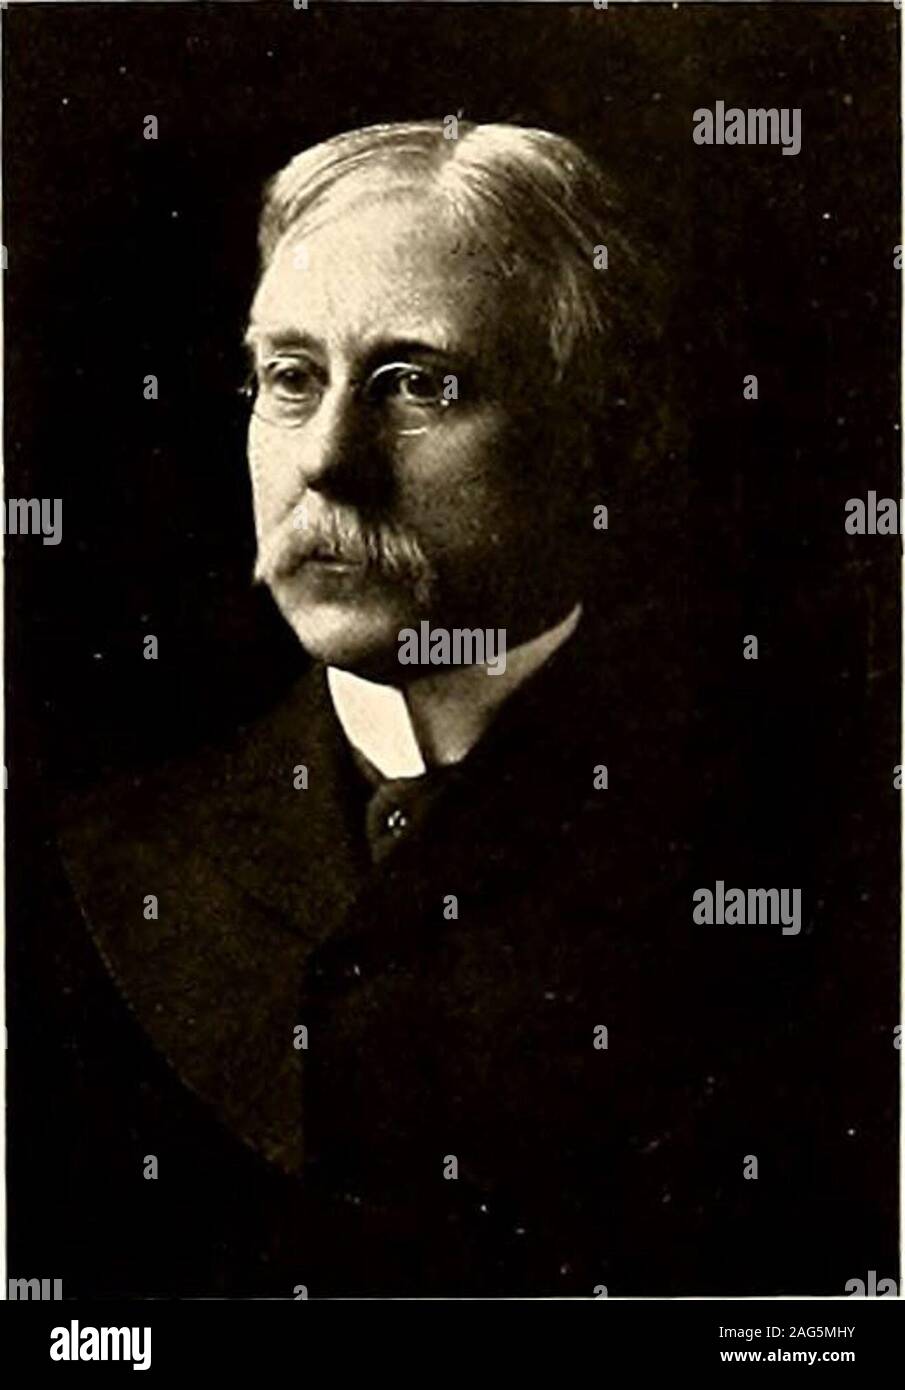 . The Forester. M ALCIILM MC NEILL. Was graduated from Princeton Universityin 1877. Received degree of A. M. in 1880,and Ph.D. in 1888 from Princeton. Taughtat Palmyra, Mo., i^jy-yX. Returned toPrinceton as Fellow in Astronomy, 1878-81.Instructor in Astronomy at Princeton. 1S81-$2. Assistant Professor of Astronomy atPrinceton, 1882-88. Professor of Mathe-matics and Astronomy at Lake Forest Col-lege since 1888. M. BROSS THOMAS. Was graduated from Williams College in1876. Received the degree of M. A. in 1880from Williams ; and D. D. from Illinois Col-lege in 1903. Studied at Union TheologicalSem Stock Photo